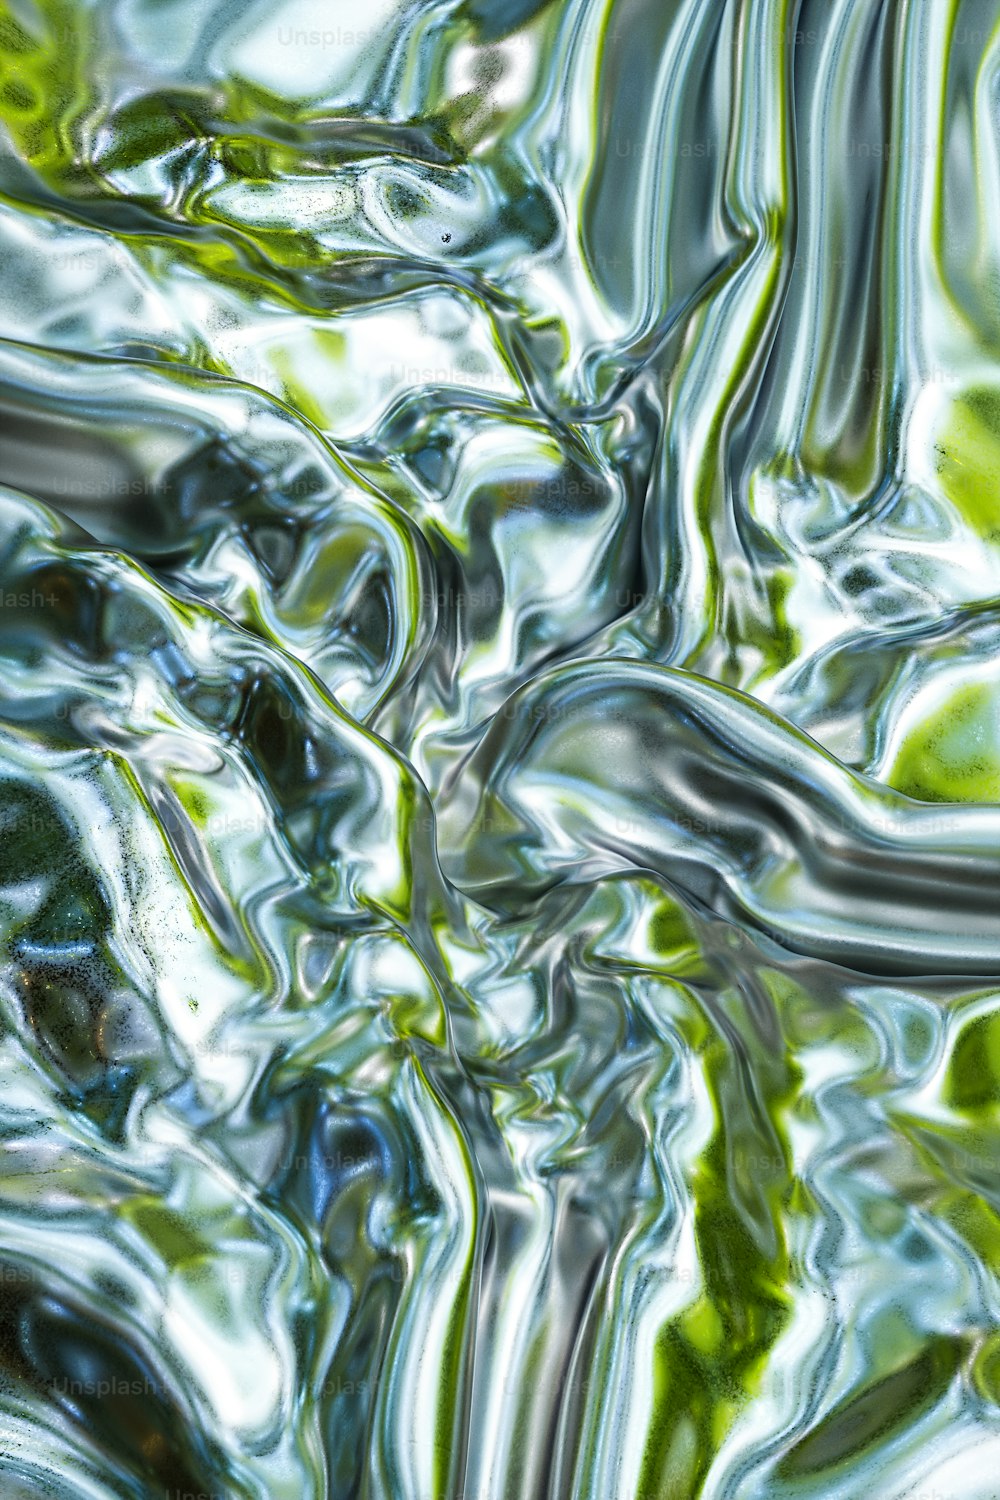 a close up view of a green and blue liquid